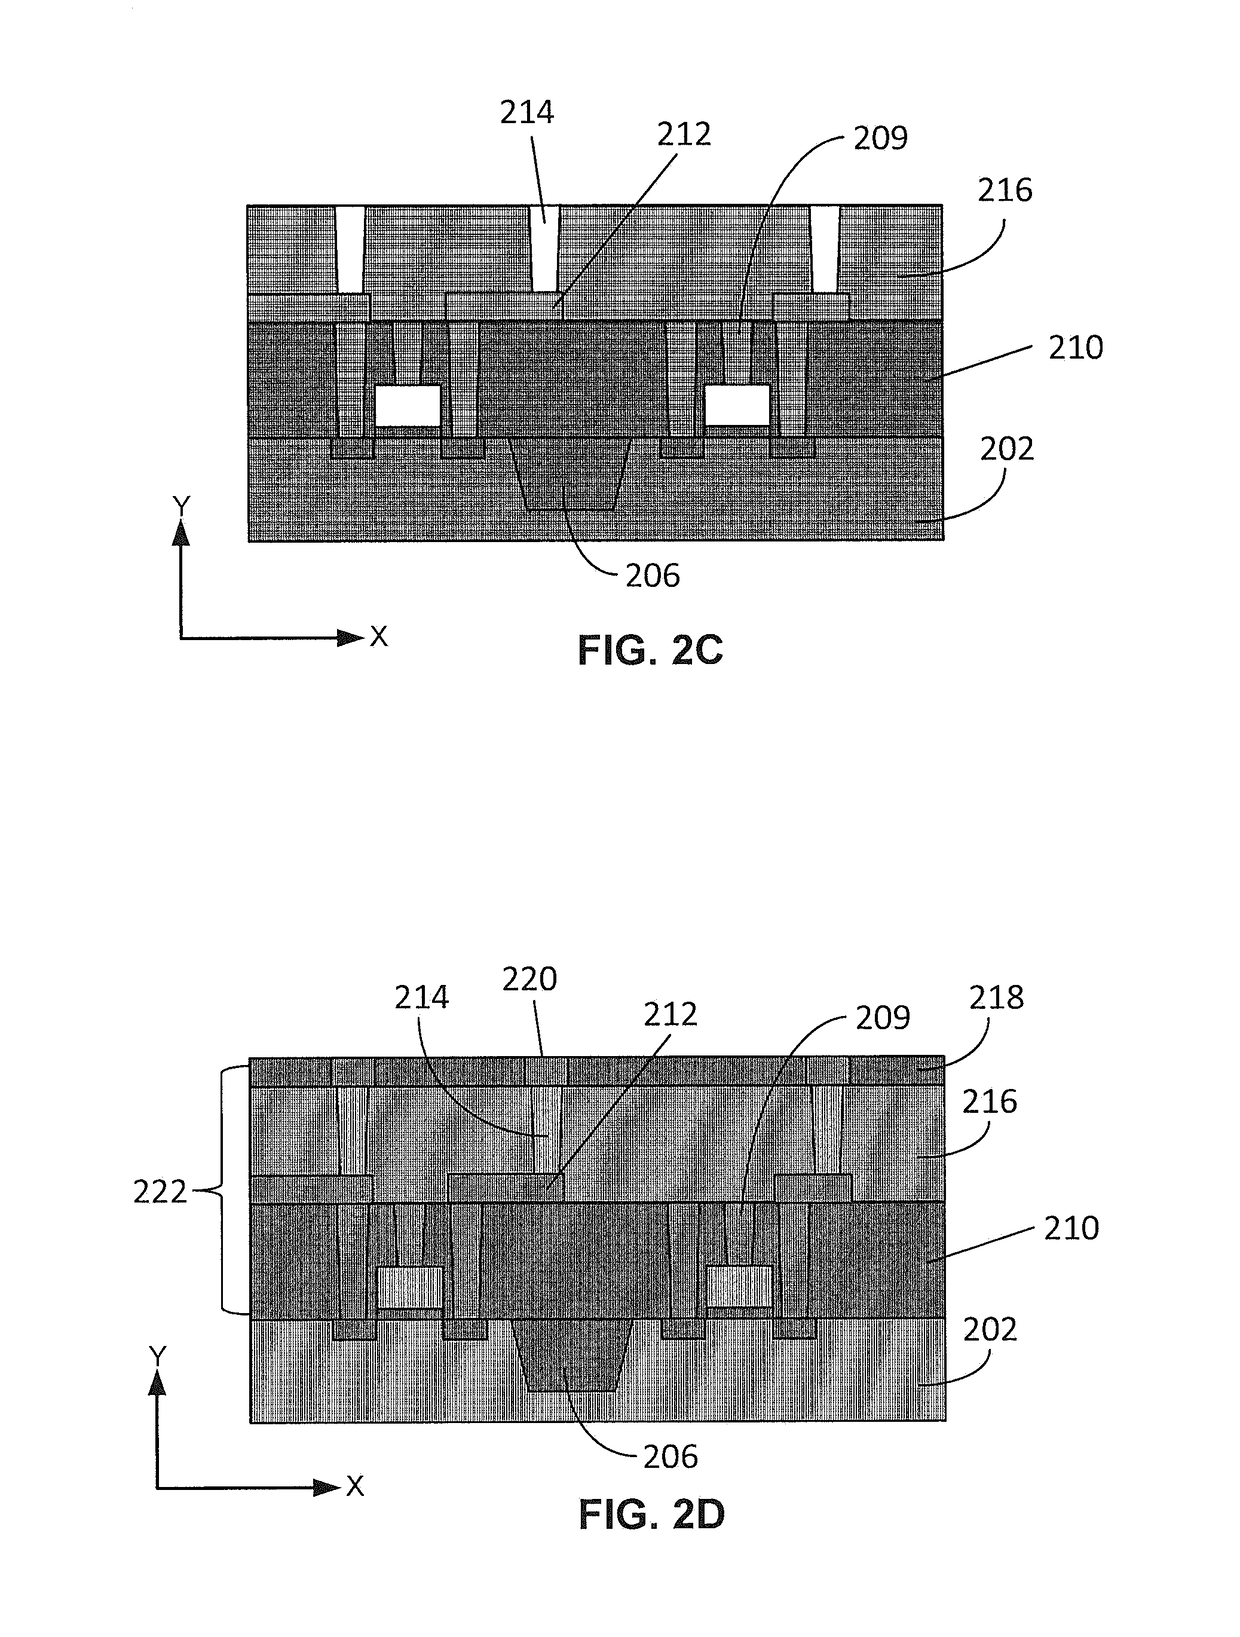 Source structure of three-dimensional memory device and method for forming the same